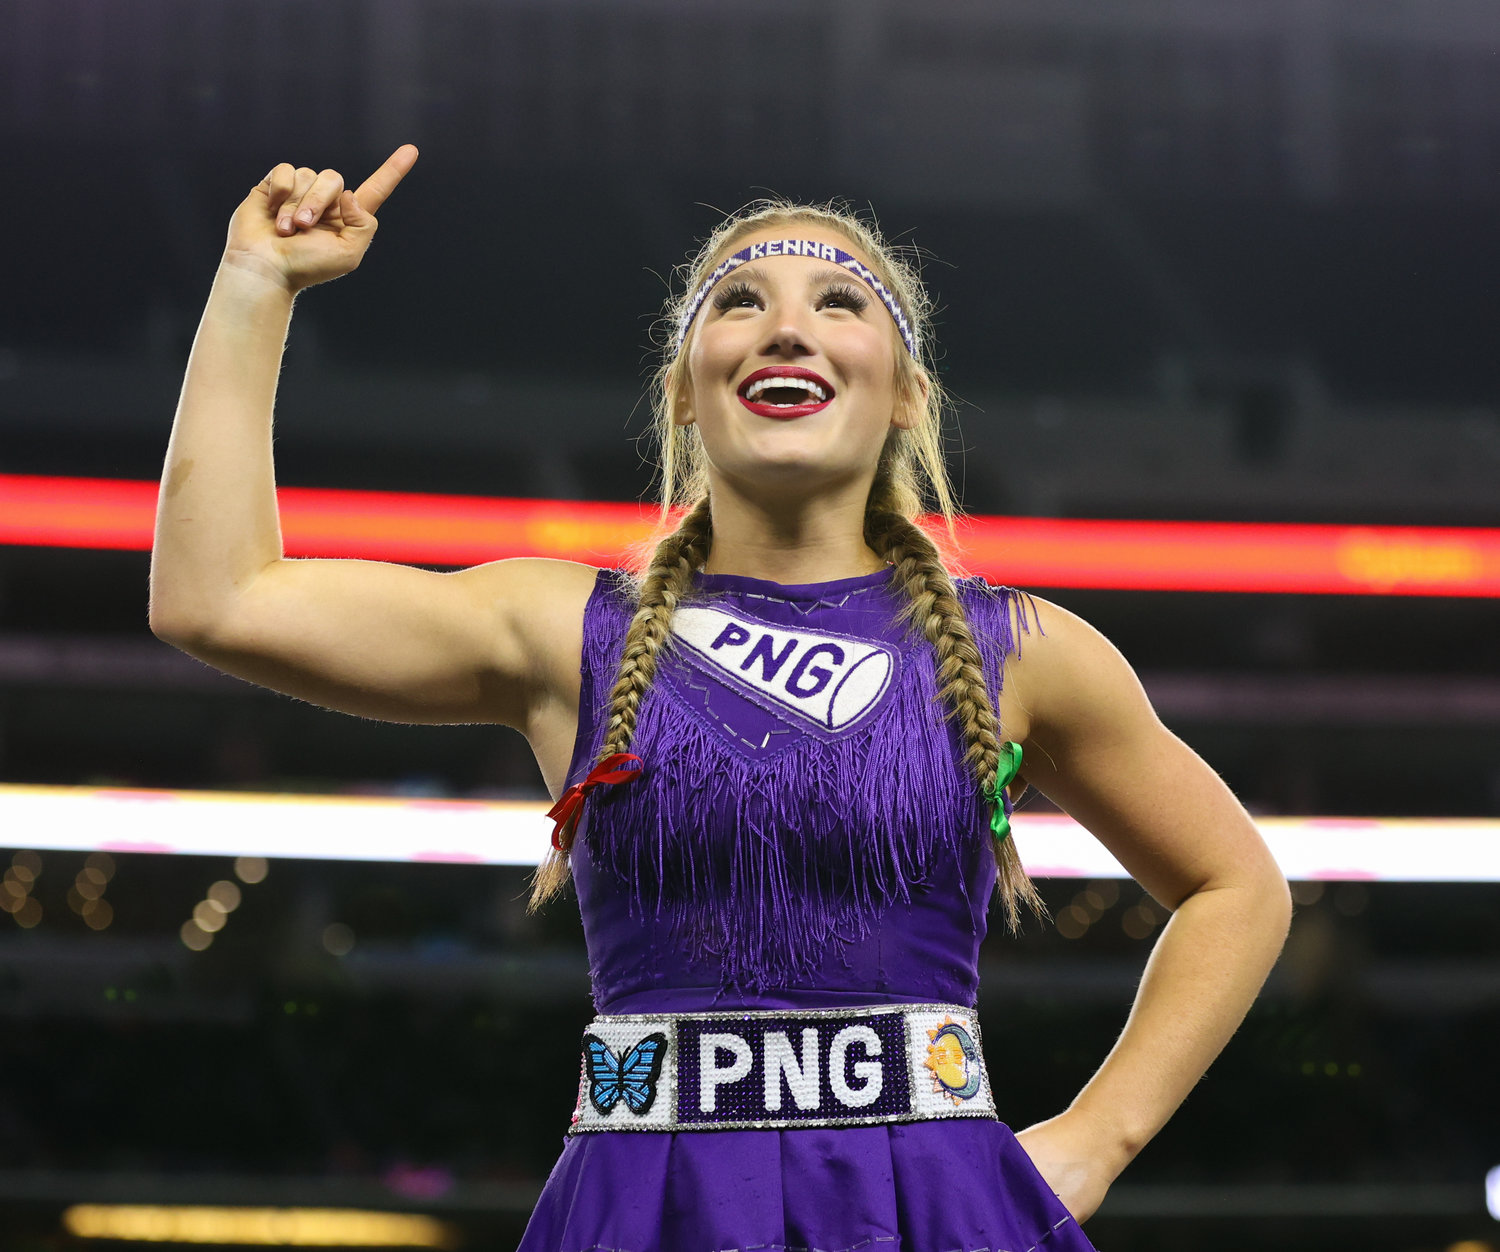 A Port Neches-Groves cheerleader during the Class 5A Division II football state championship game between South Oak Cliff and Port Neches-Groves in Arlington, Texas, on Dec. 16, 2022.